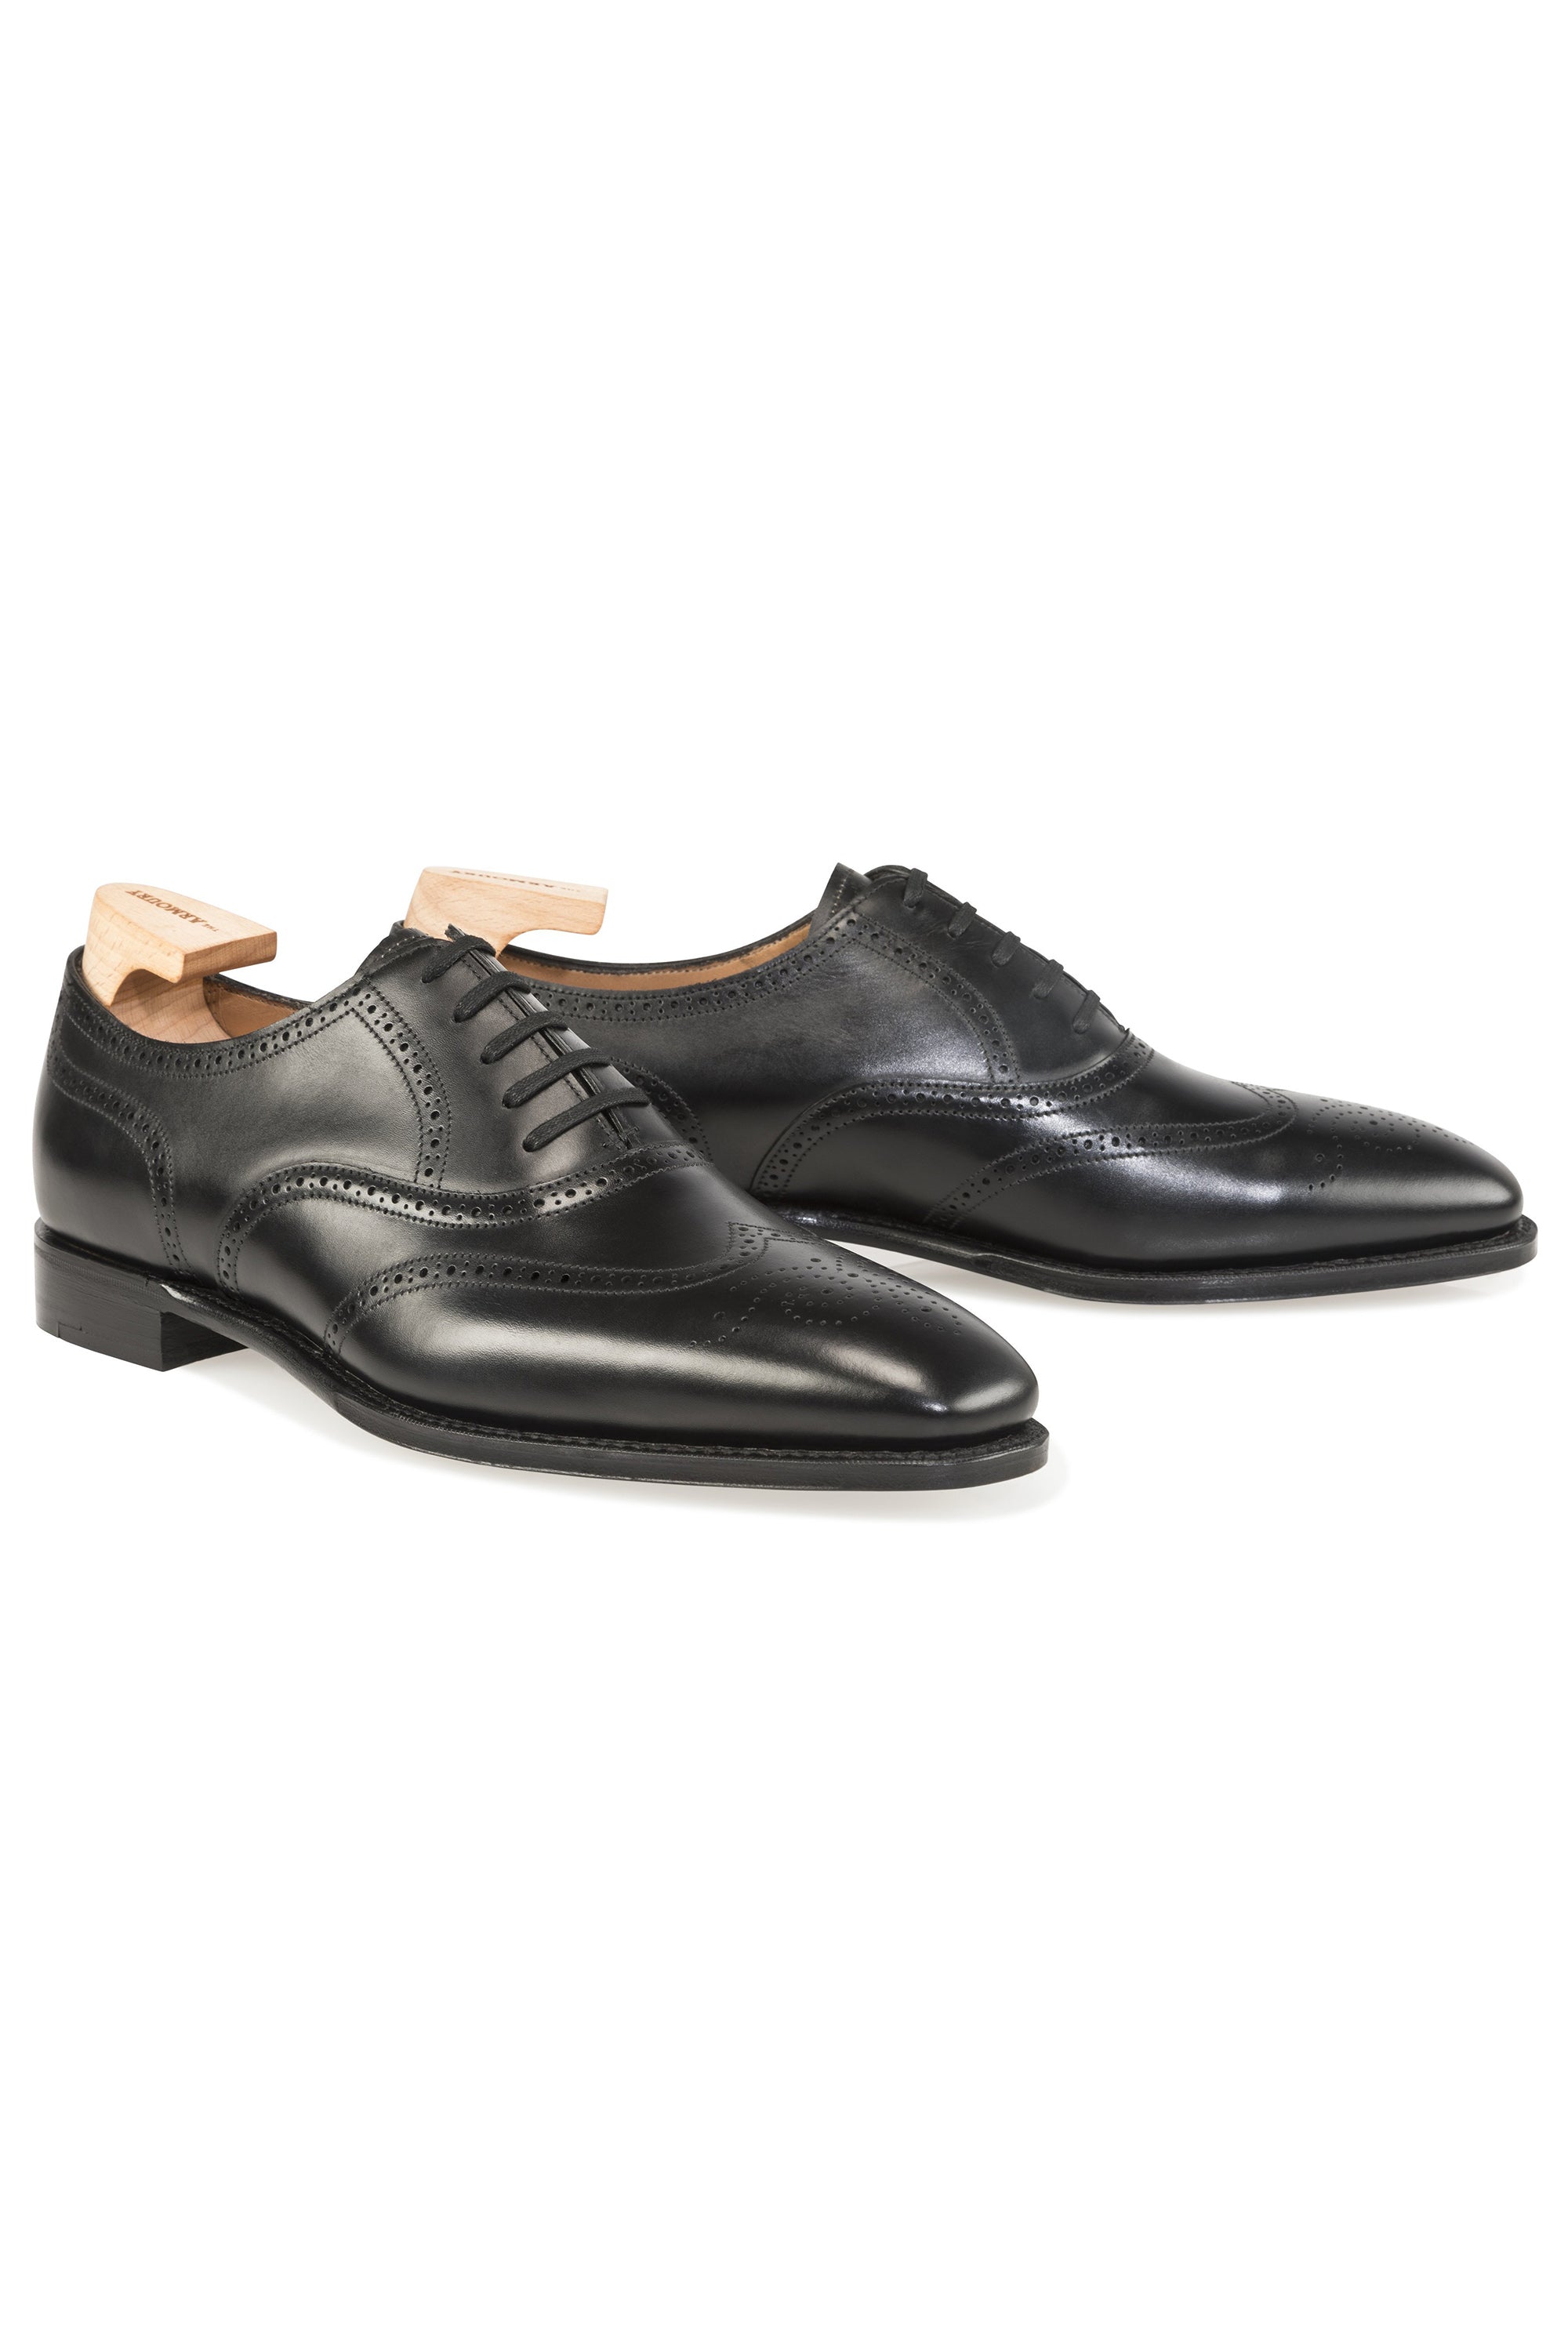 The Armoury Hajime 100355 Gloucester Black Calf Oxford Shoes *factory seconds*